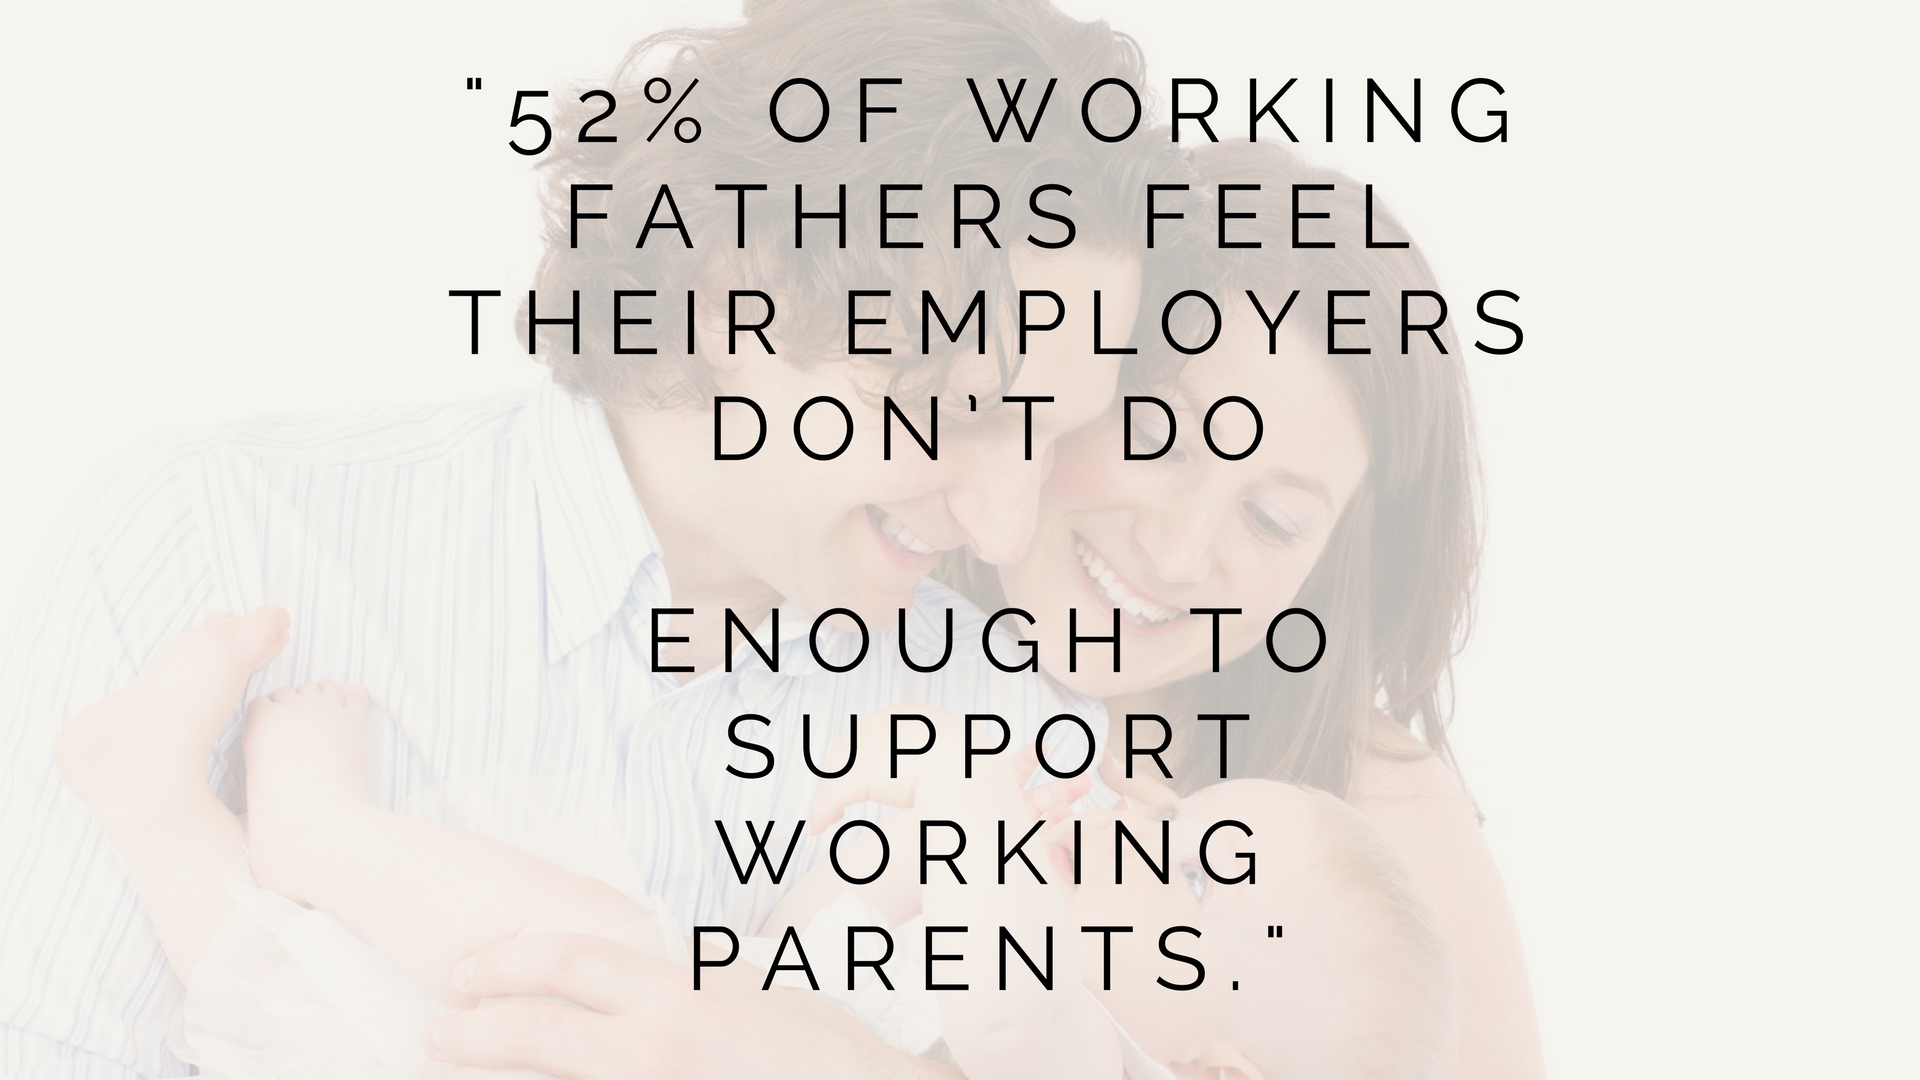 52 percent of working fathers feel their employers don’t do enough to support working parents